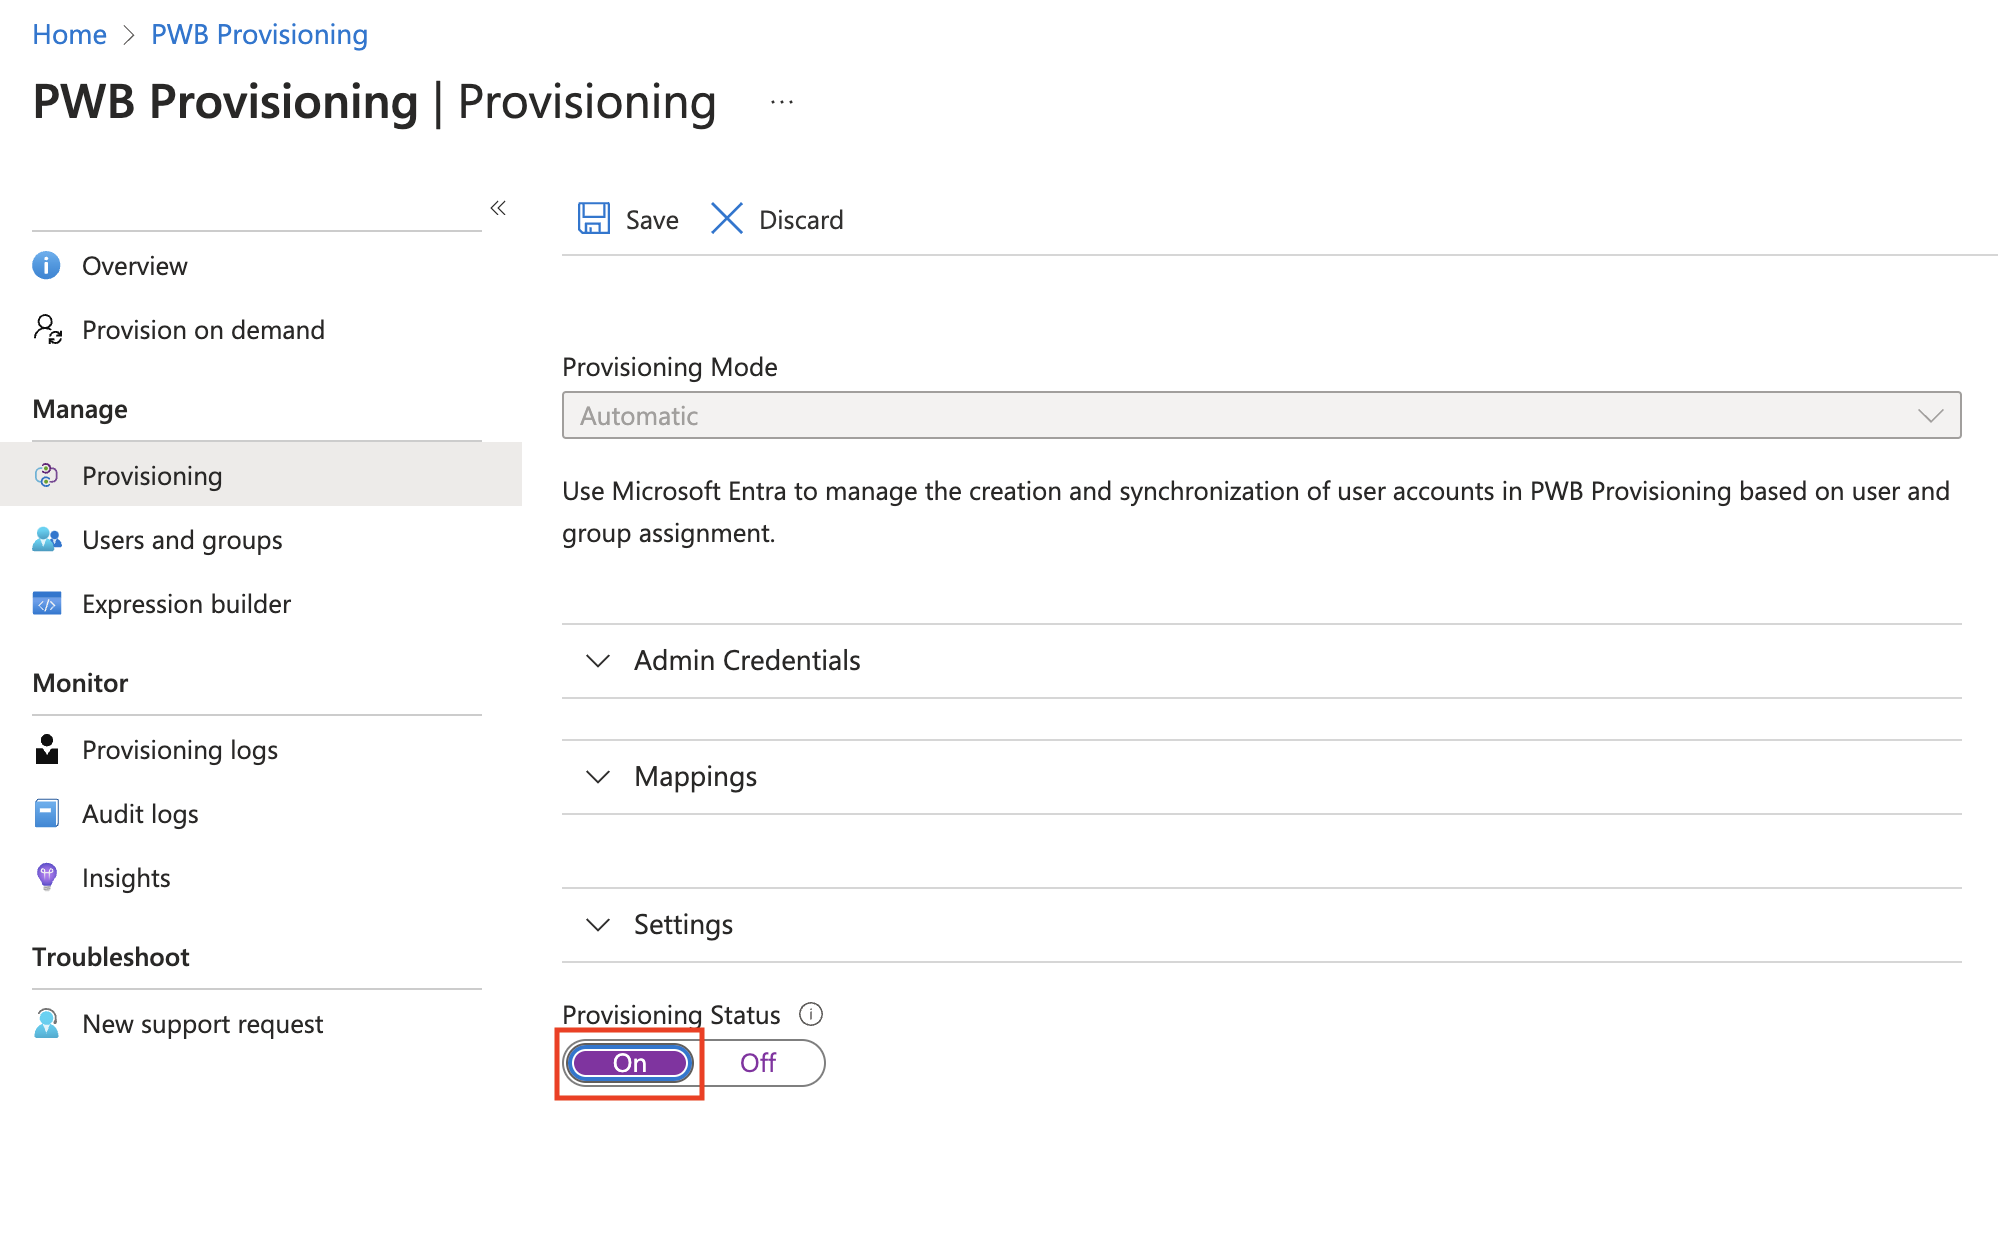 Screenshot of the Provisioning blade with the Provisioning Status toggle button set to On.